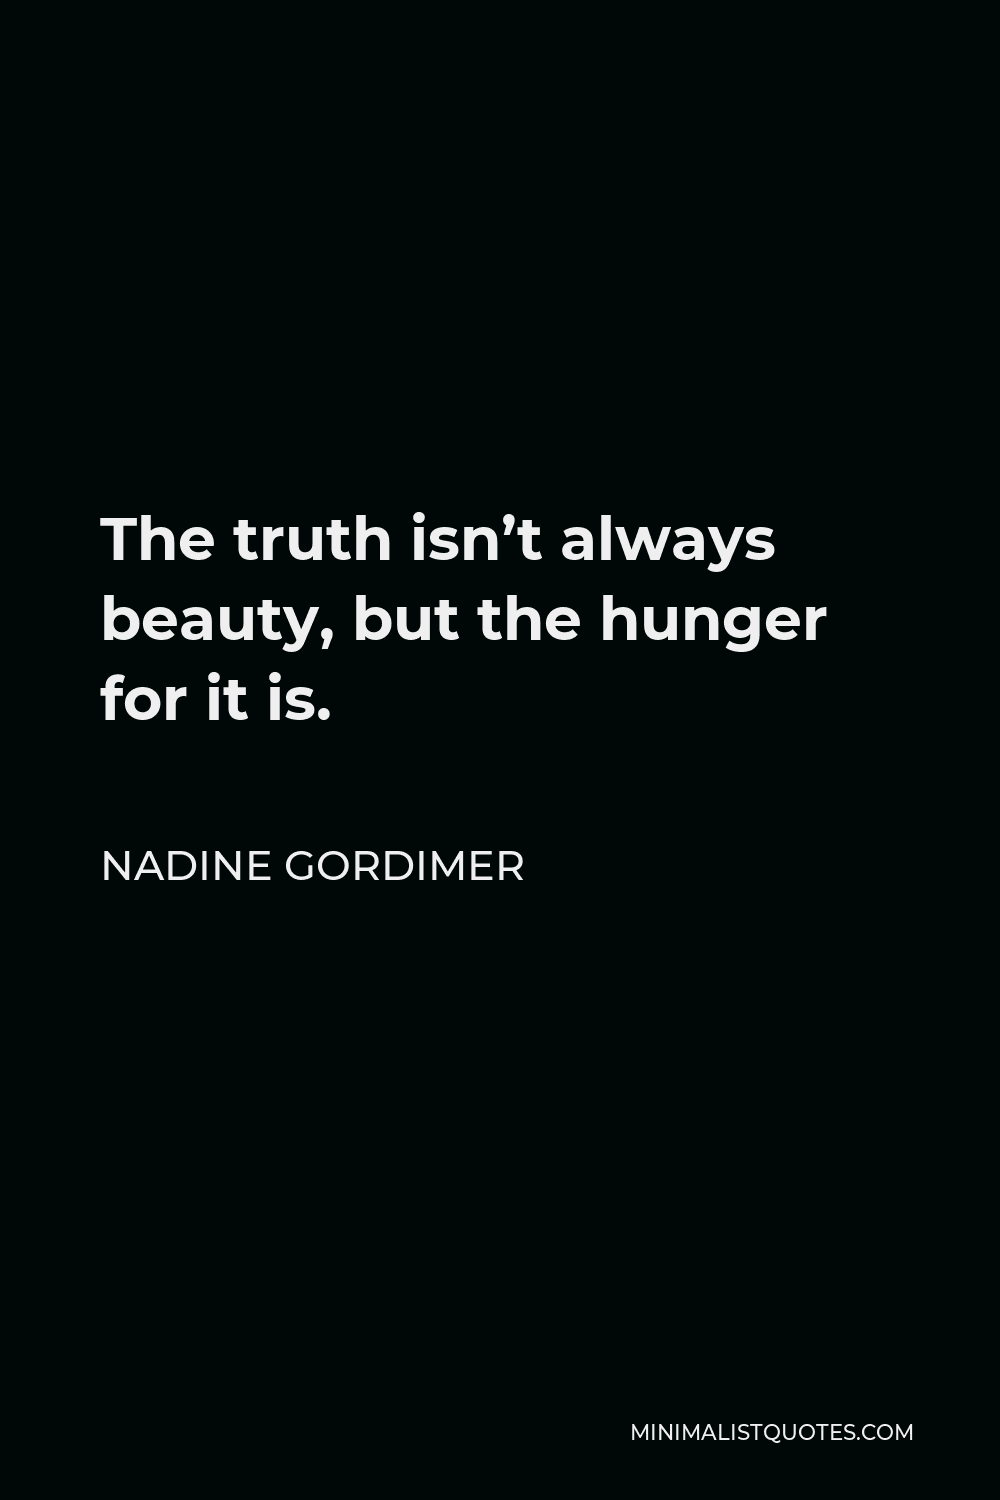 Nadine Gordimer Quote - The truth isn’t always beauty, but the hunger for it is.